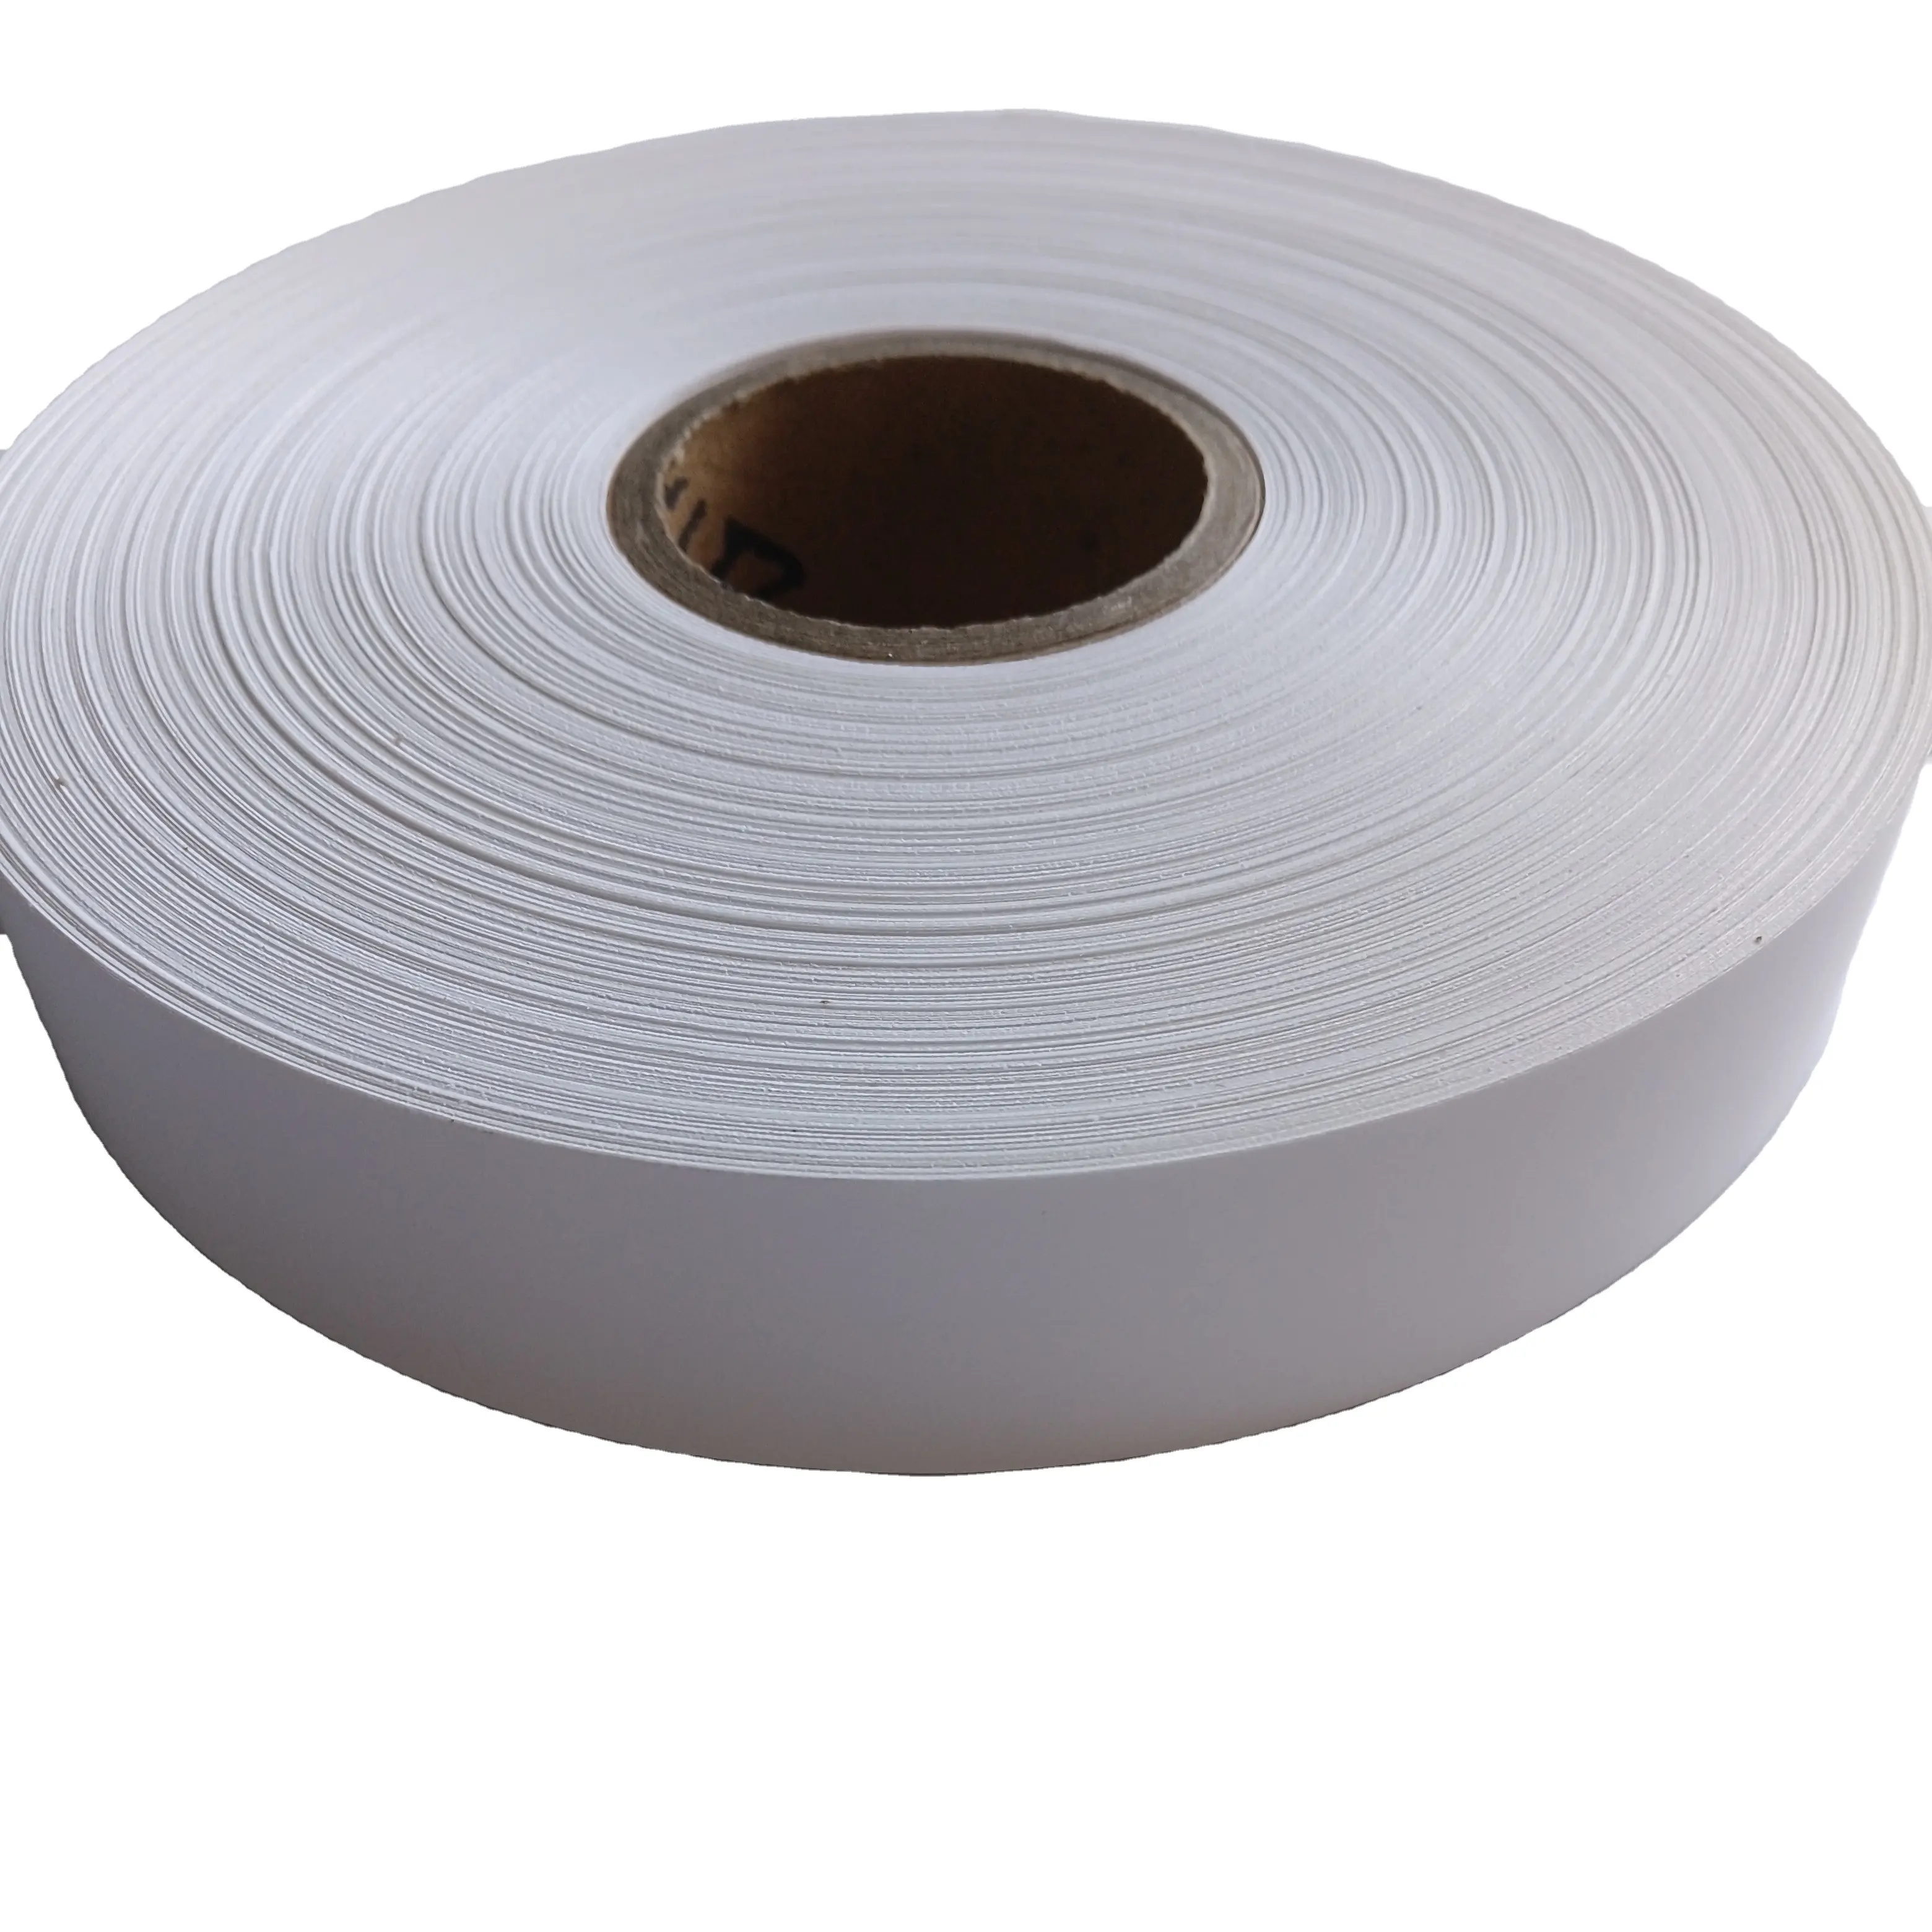 Wholesale Factory Nylon polyester Taffeta tape ribbon Label roll For Thermal Transfer Printing